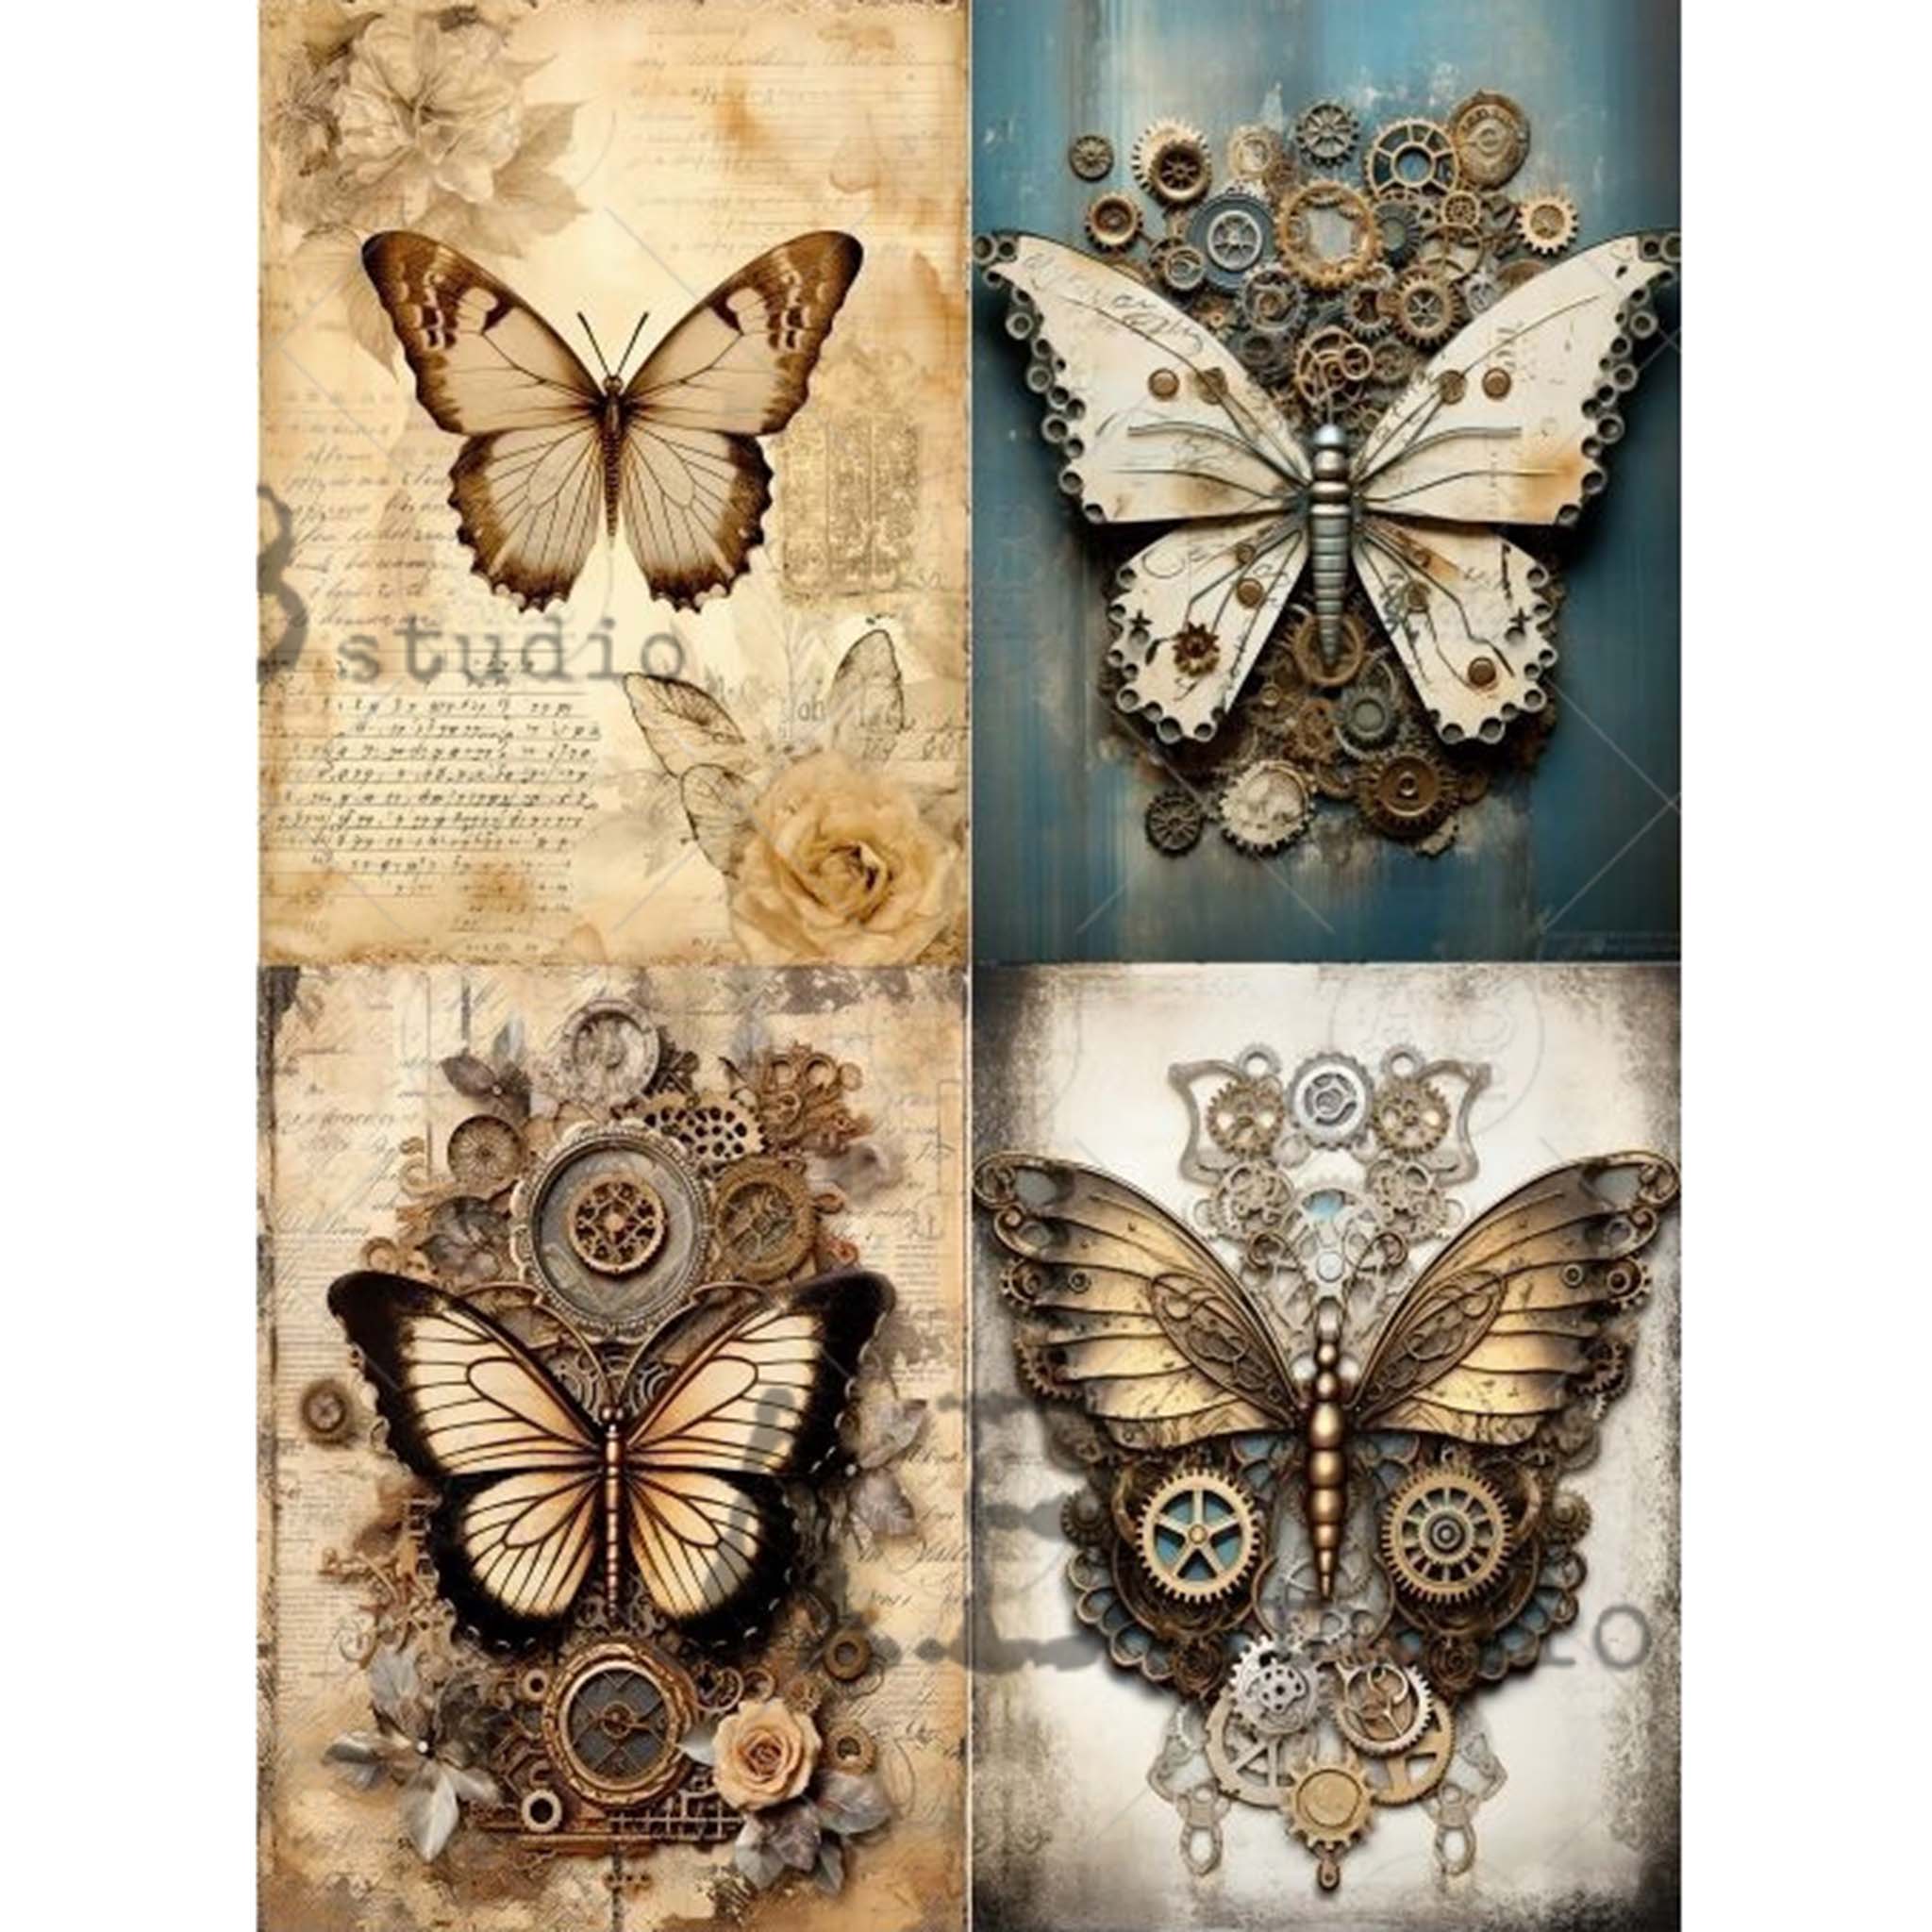 A4 rice paper design that features 4 unique Steampunk butterfly designs, set against beautiful vintage backgrounds. White borders are on the sides.